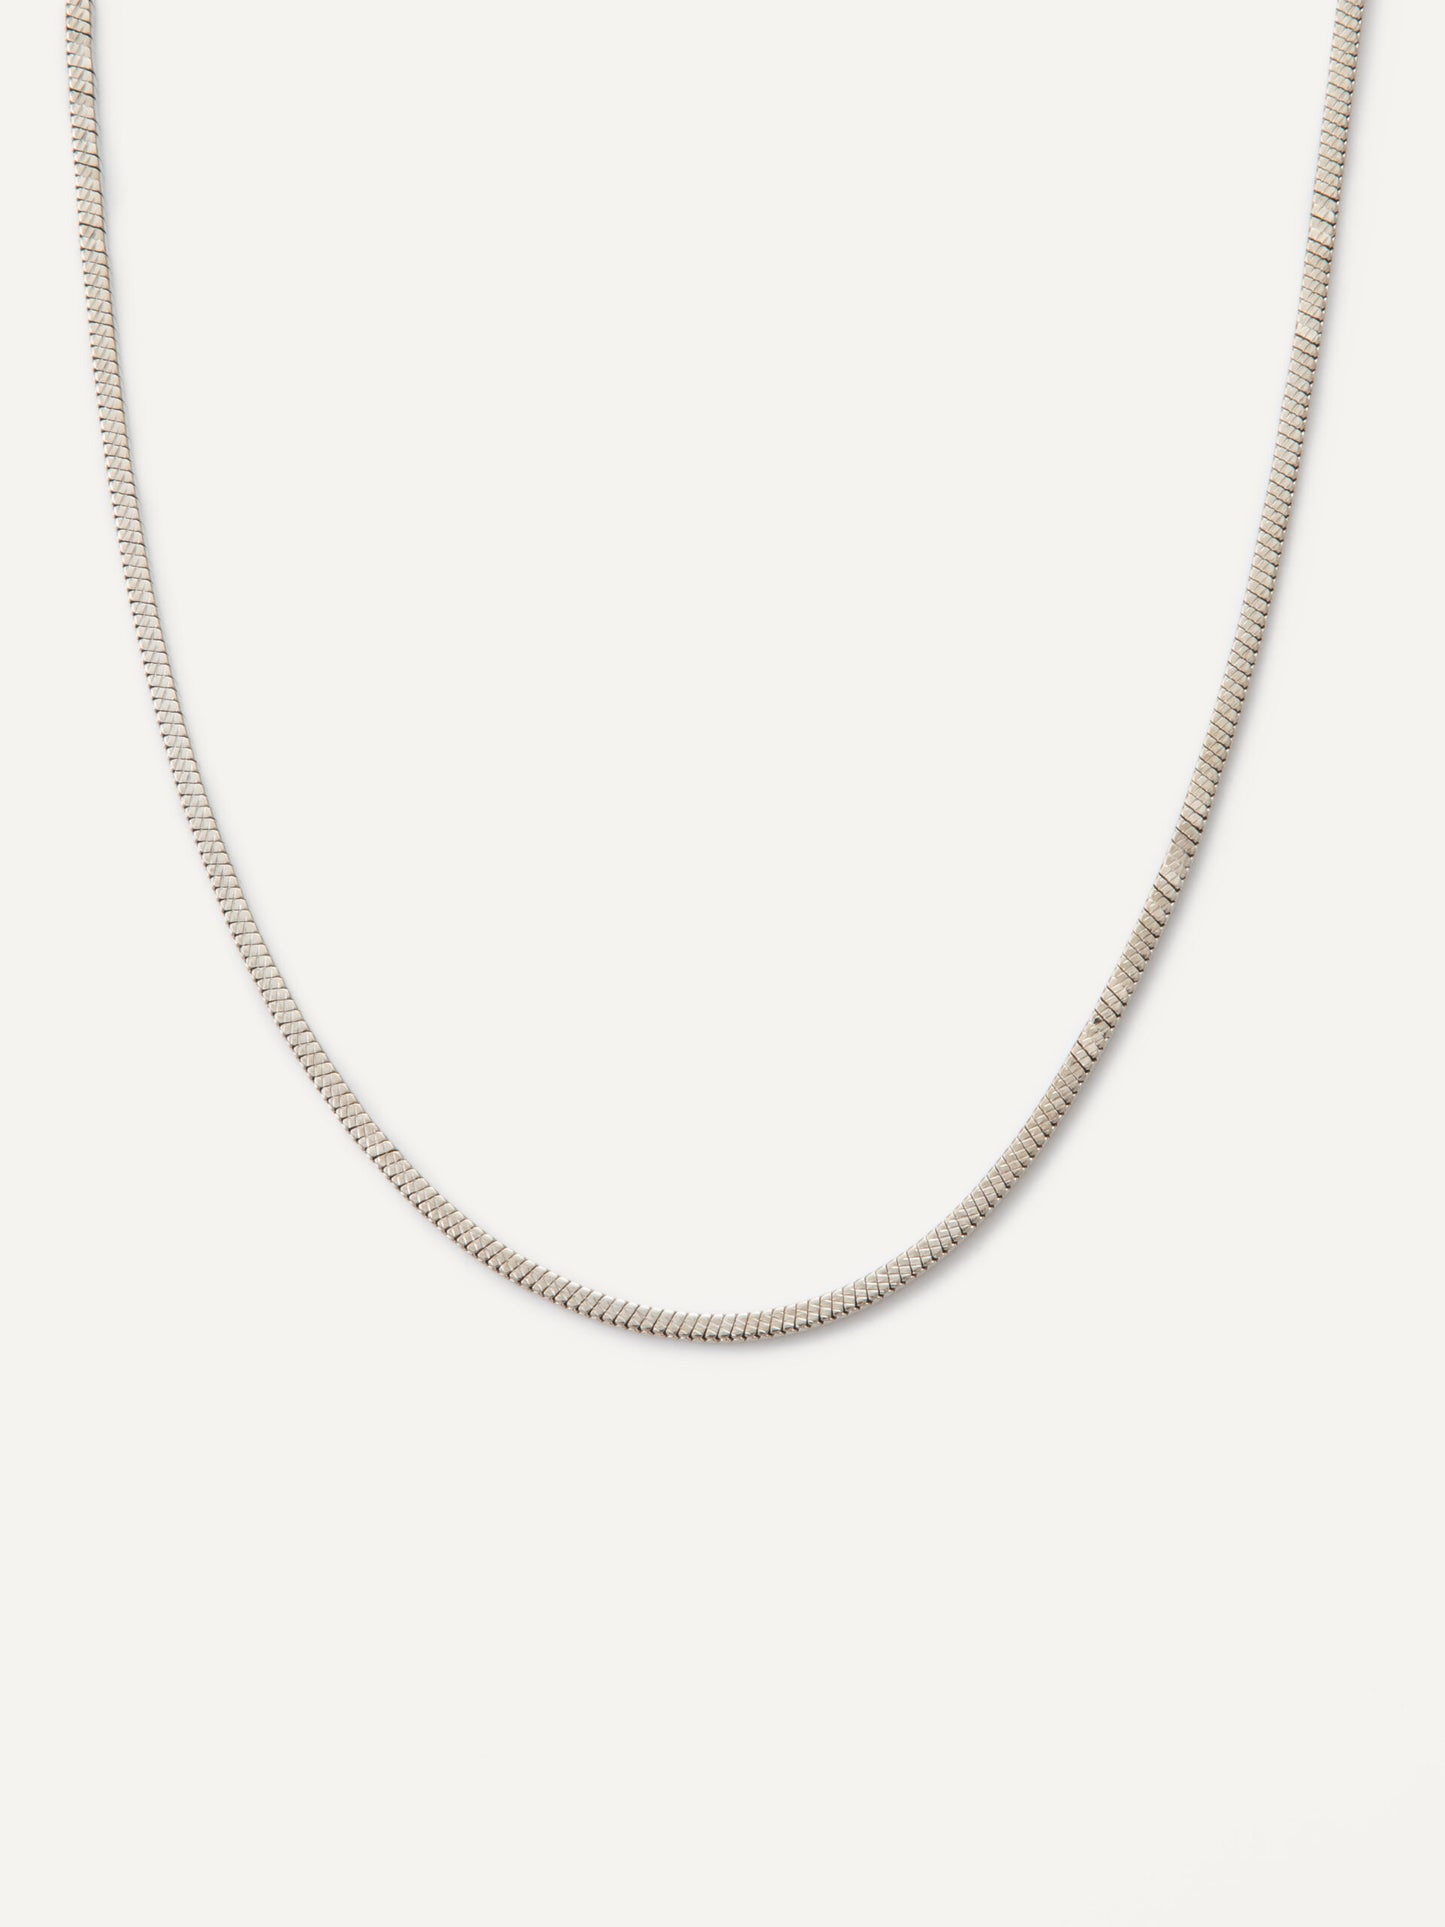 CAMMIE Necklace in Silver